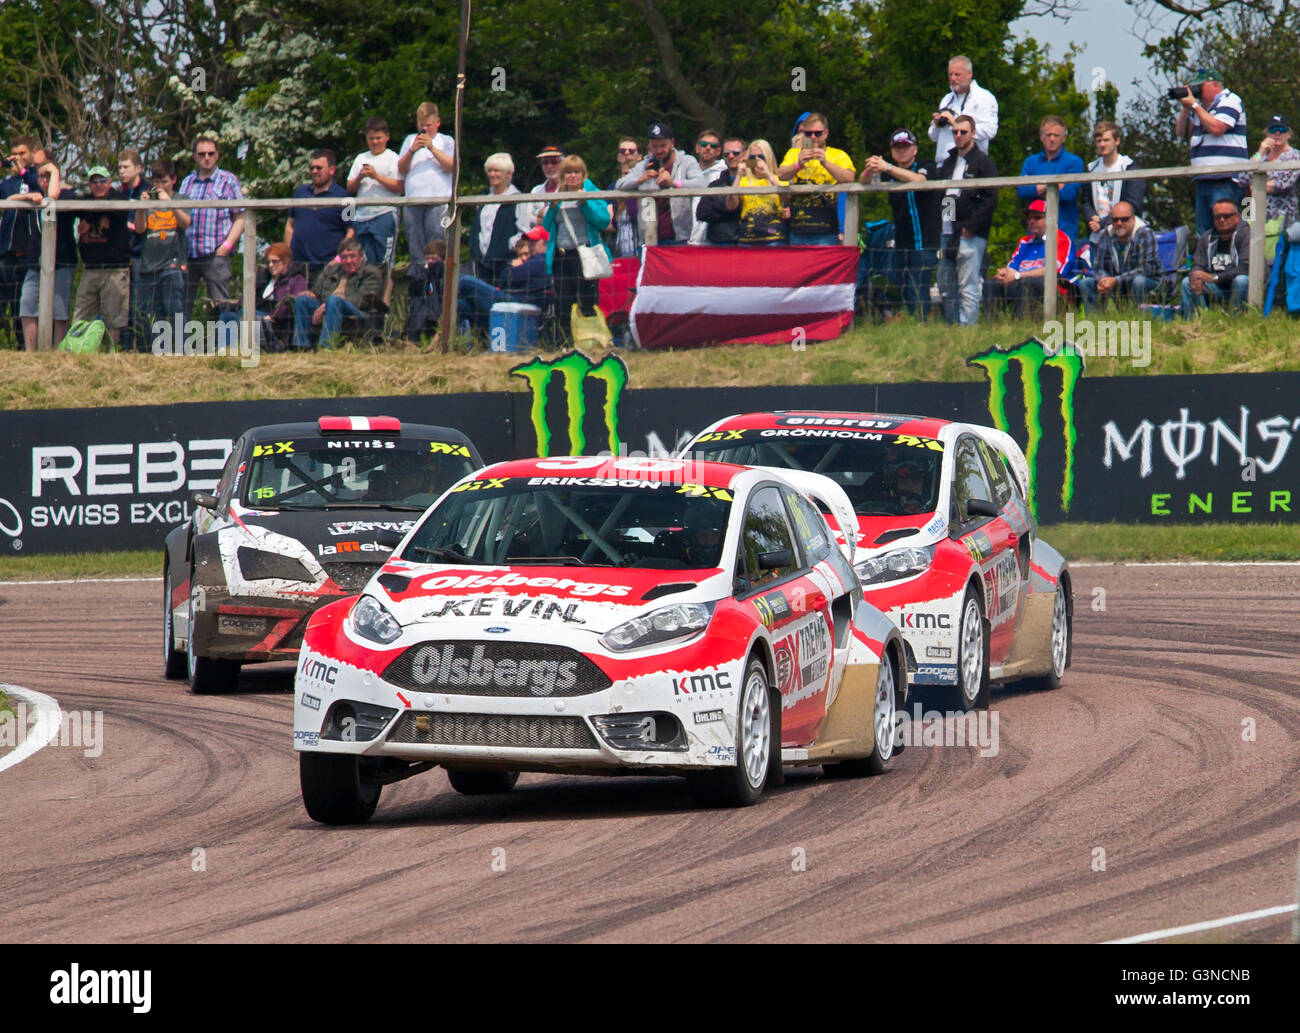 World Rallycross racing, leader Ford Fiesta ST driven by Kevin Eriksson. Stock Photo